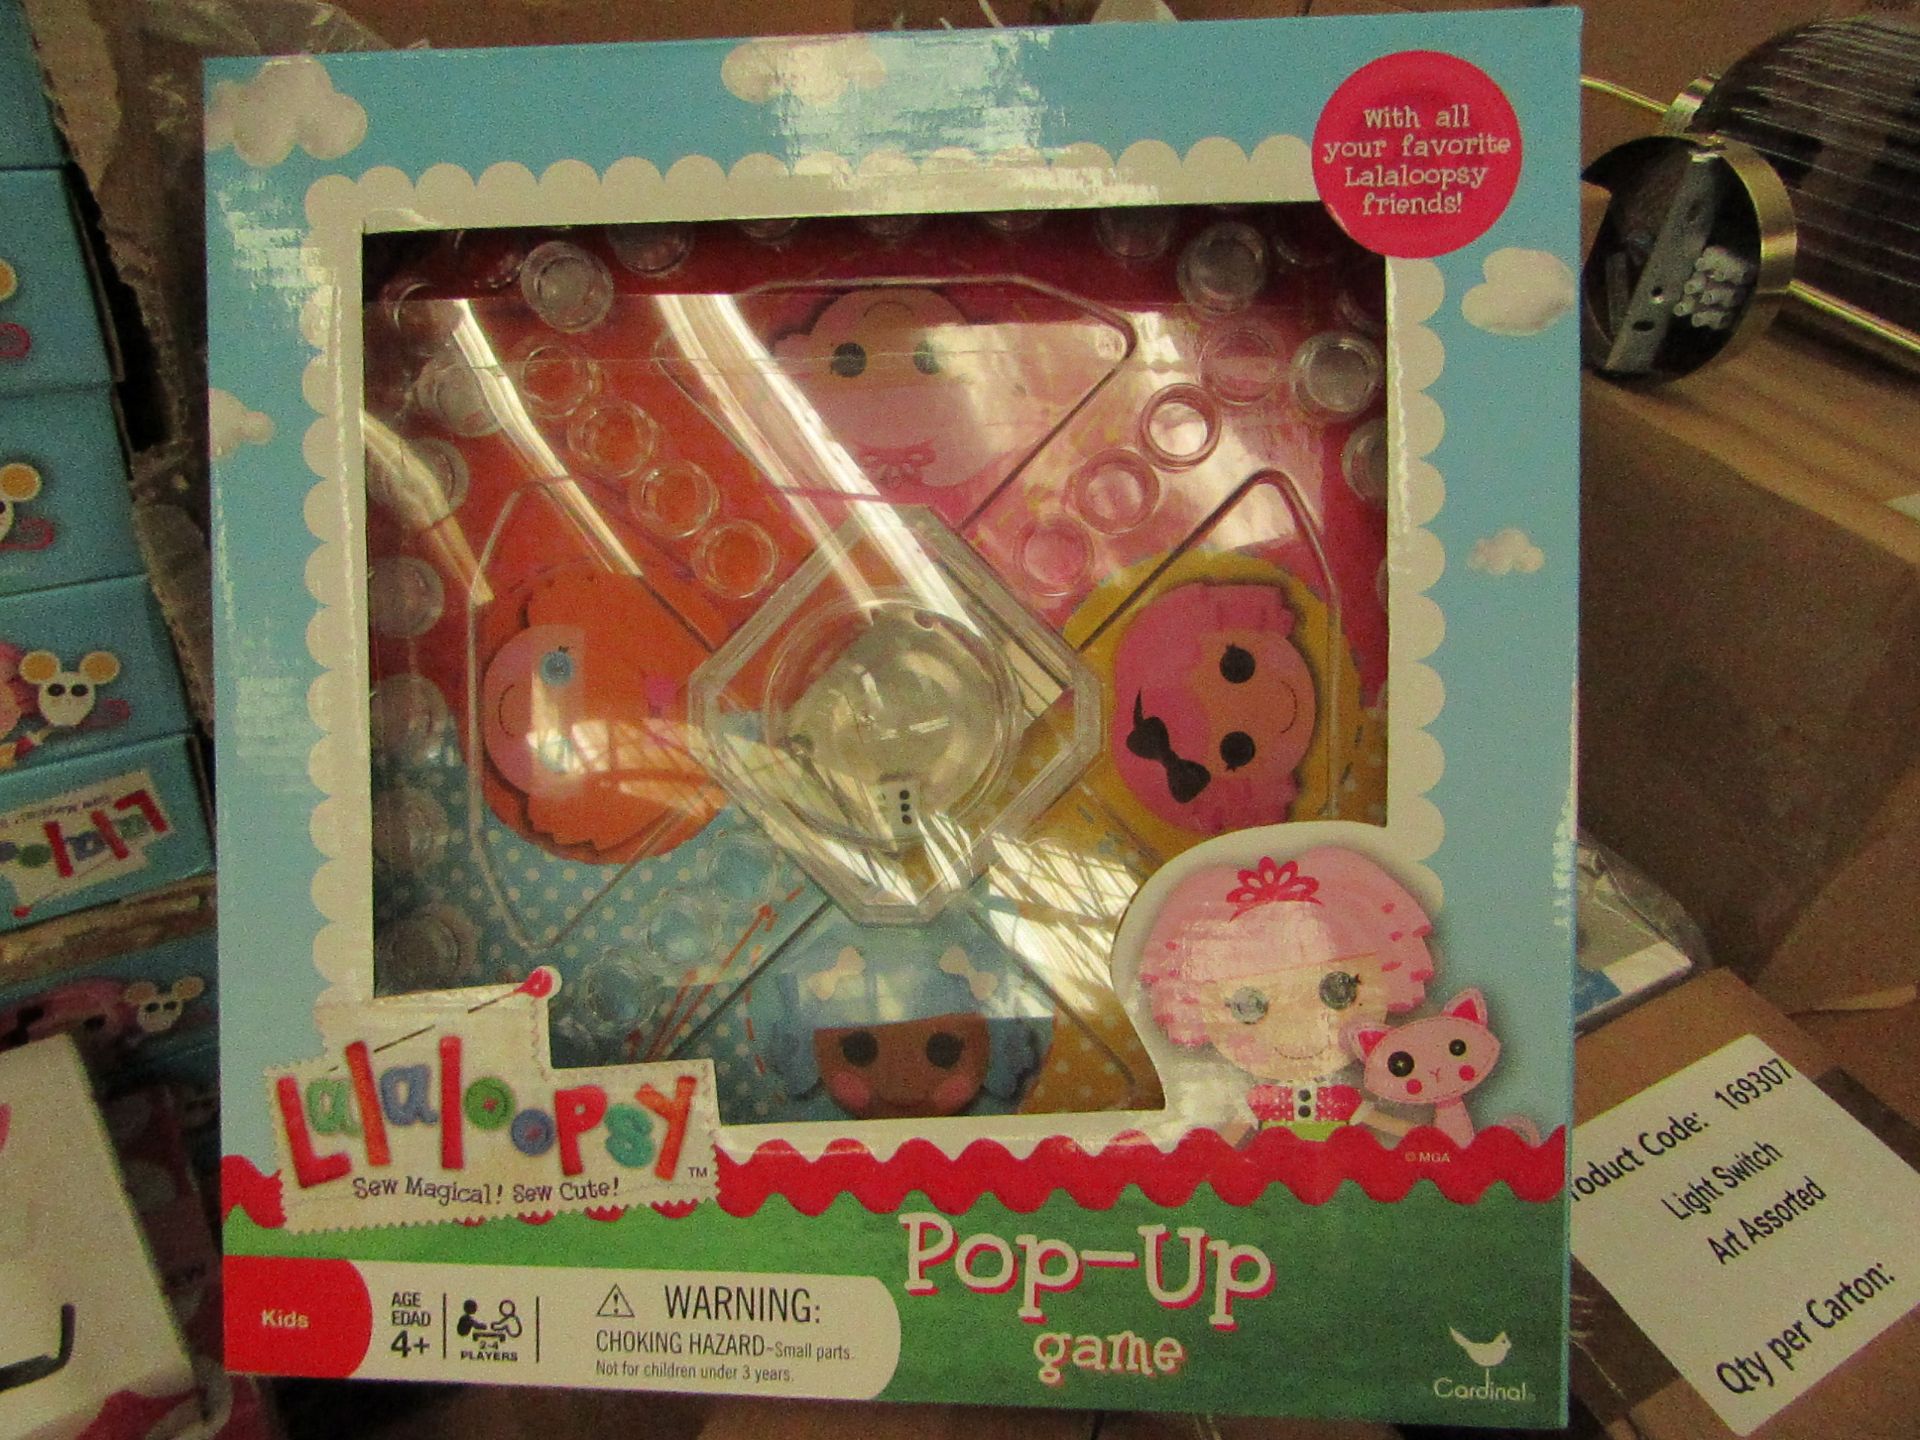 5x Lalaloopay Pop-Up Game - New & Packaged.